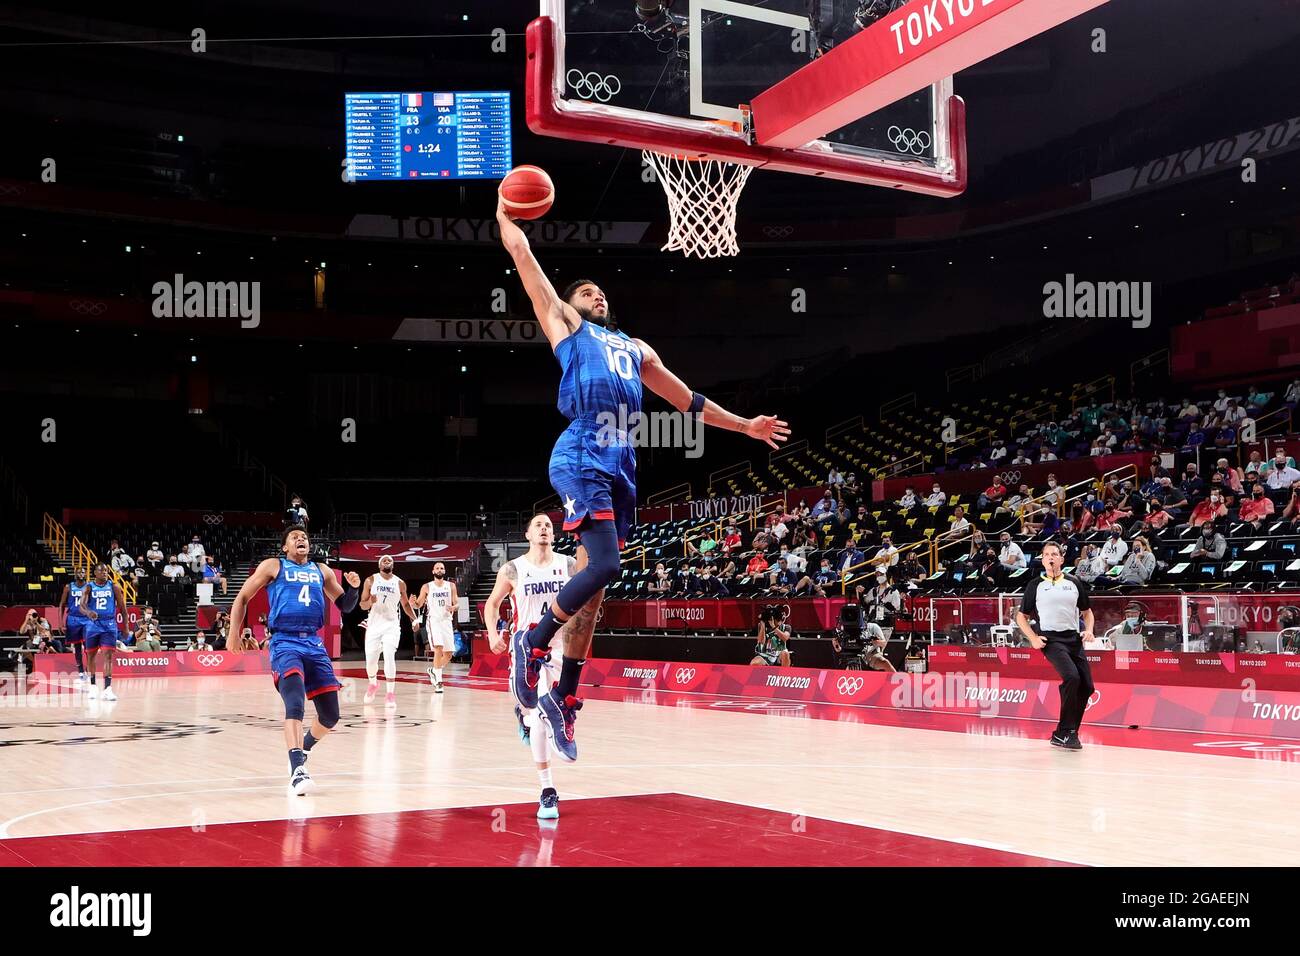 Tokyo, Japan, 25 July, 2021. Jayson Tatum of Team United States jumps high  during the Men's Basketball Preliminary Round Group A - Match 4 between  France and USA on Day 2 of